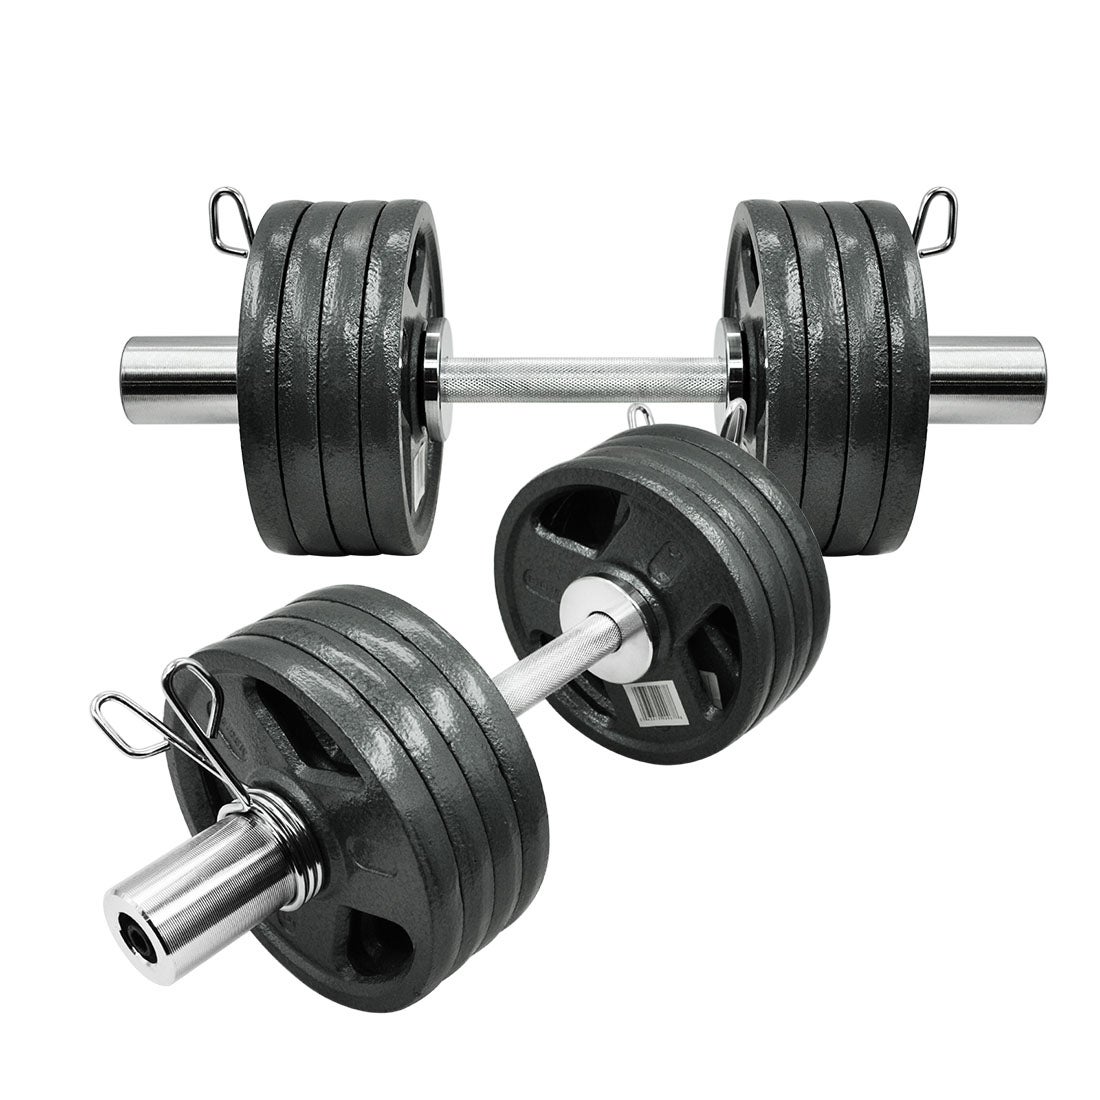 44.3kg Olympic Dumbell Set - 5lbs x 16 Cast Iron Weight Plate 50cm Dumbbell Set